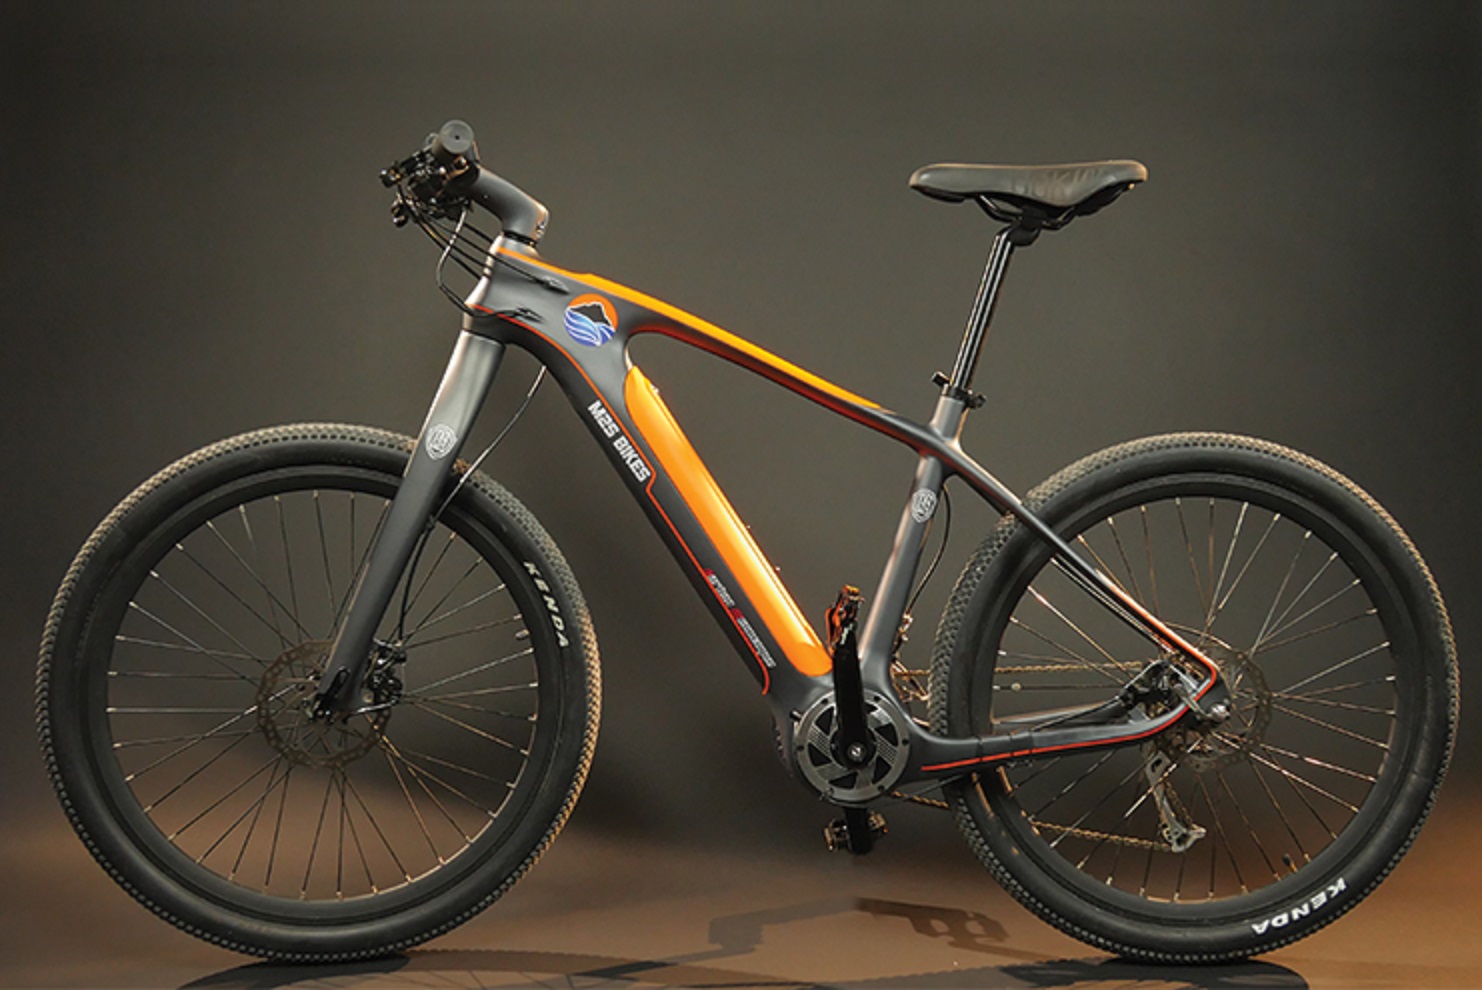 The All-Go lightweight electric bike has a frame made with carbon fiber.